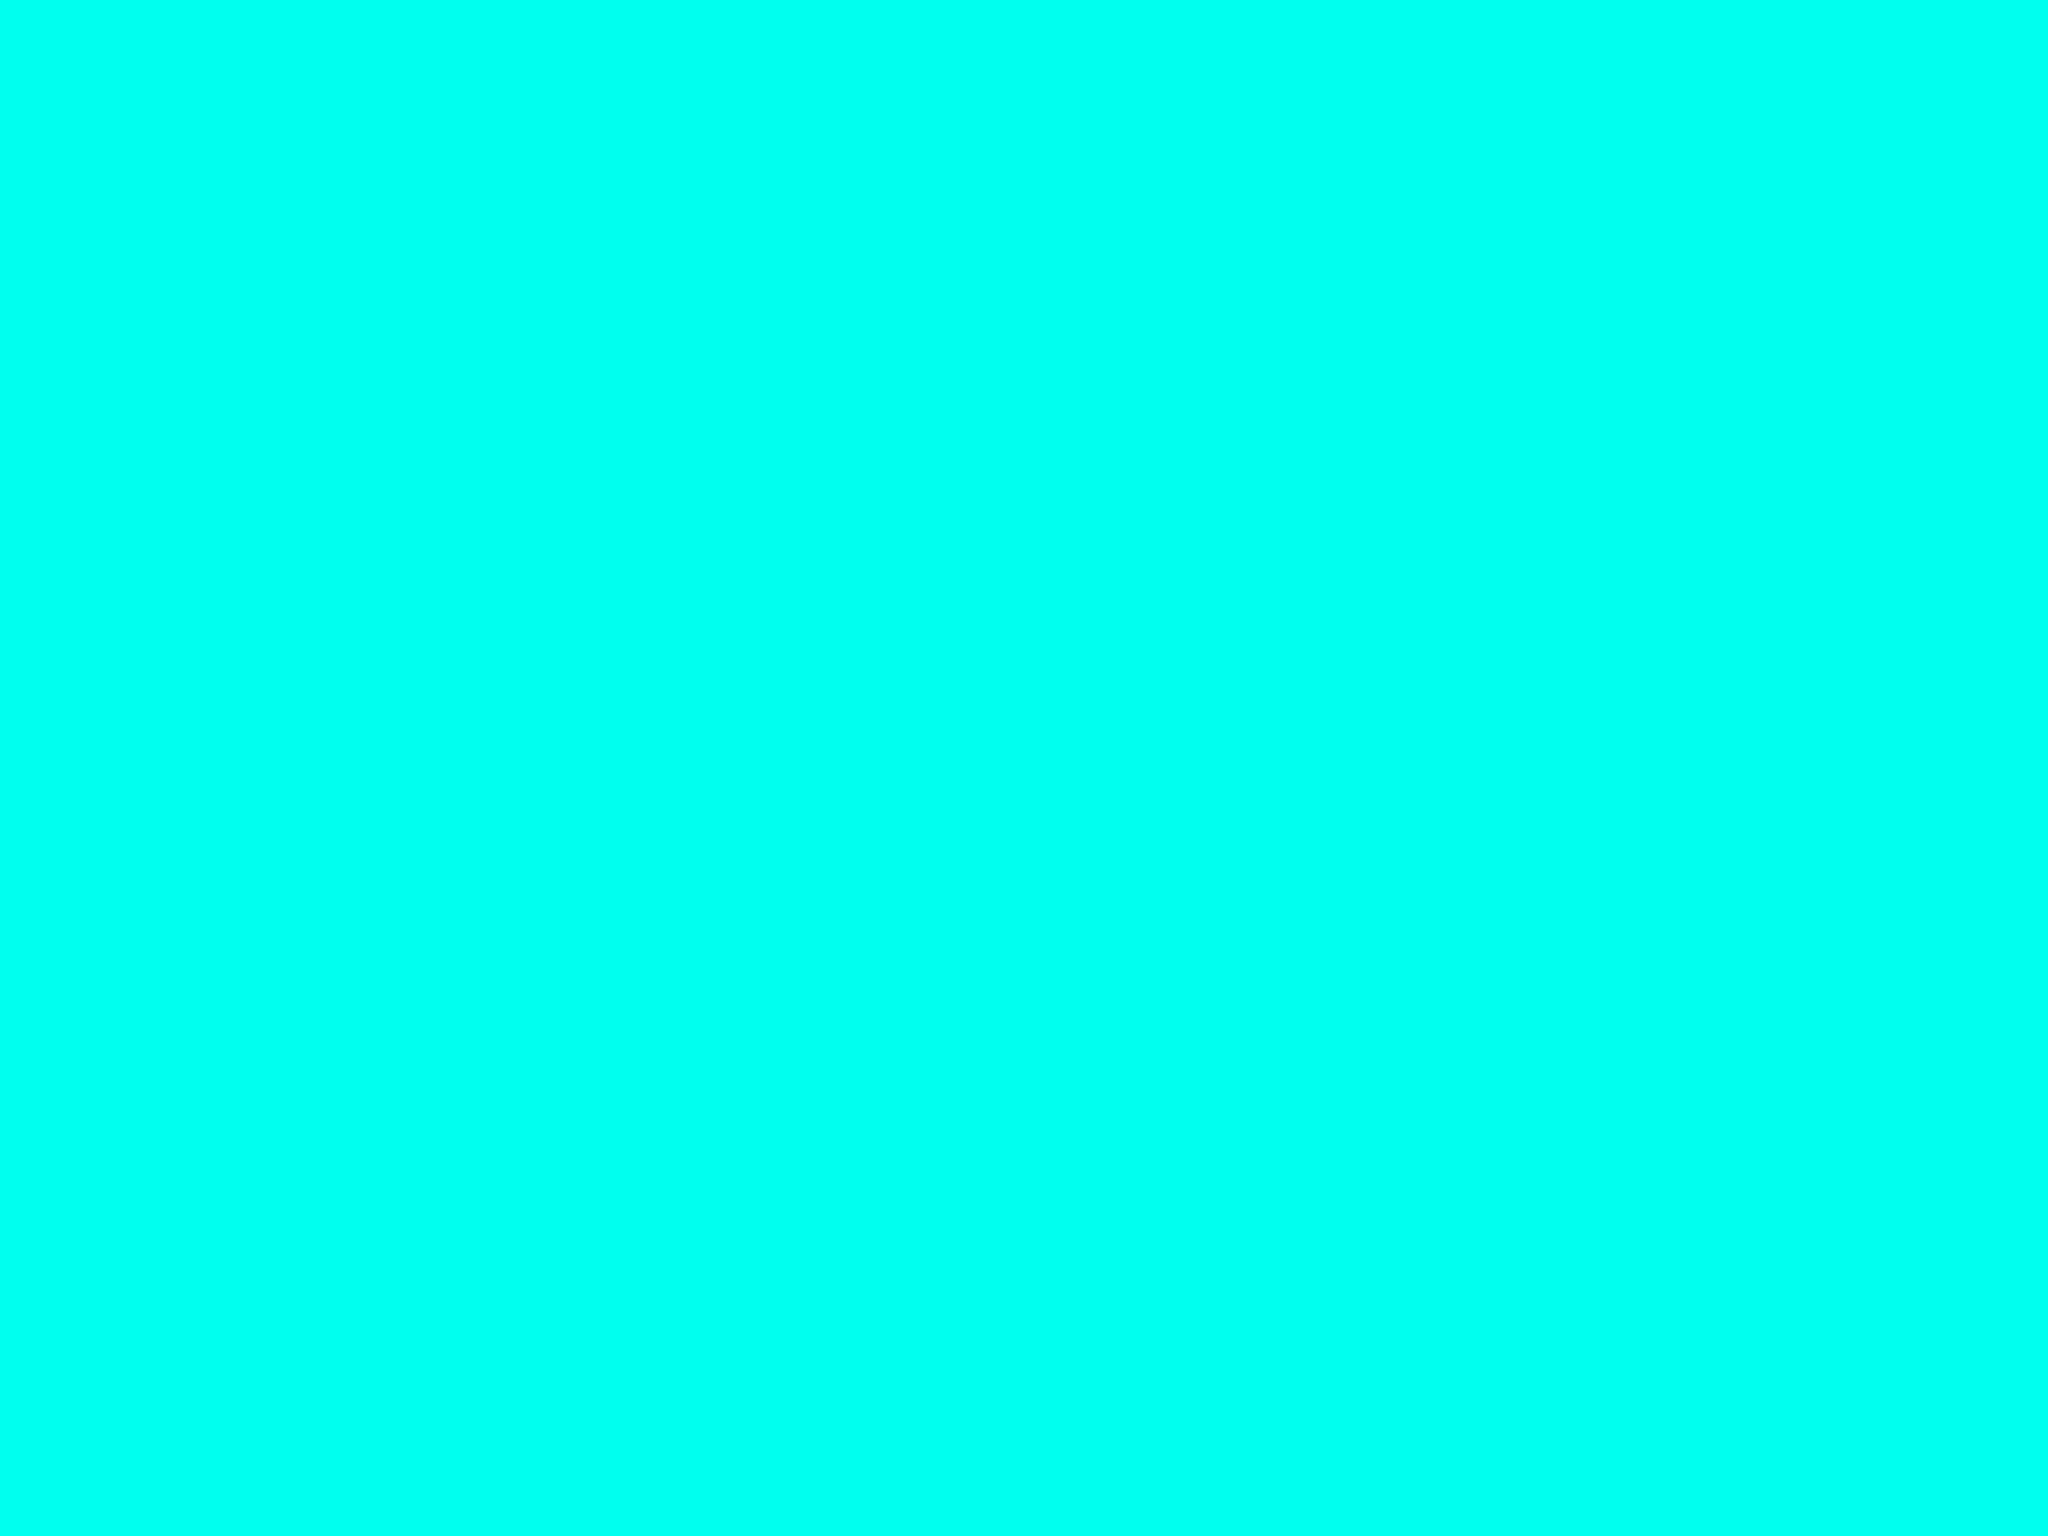 2048x1536 Turquoise Blue Solid Color Background Coloring Wallpapers Download Free Images Wallpaper [coloring876.blogspot.com]